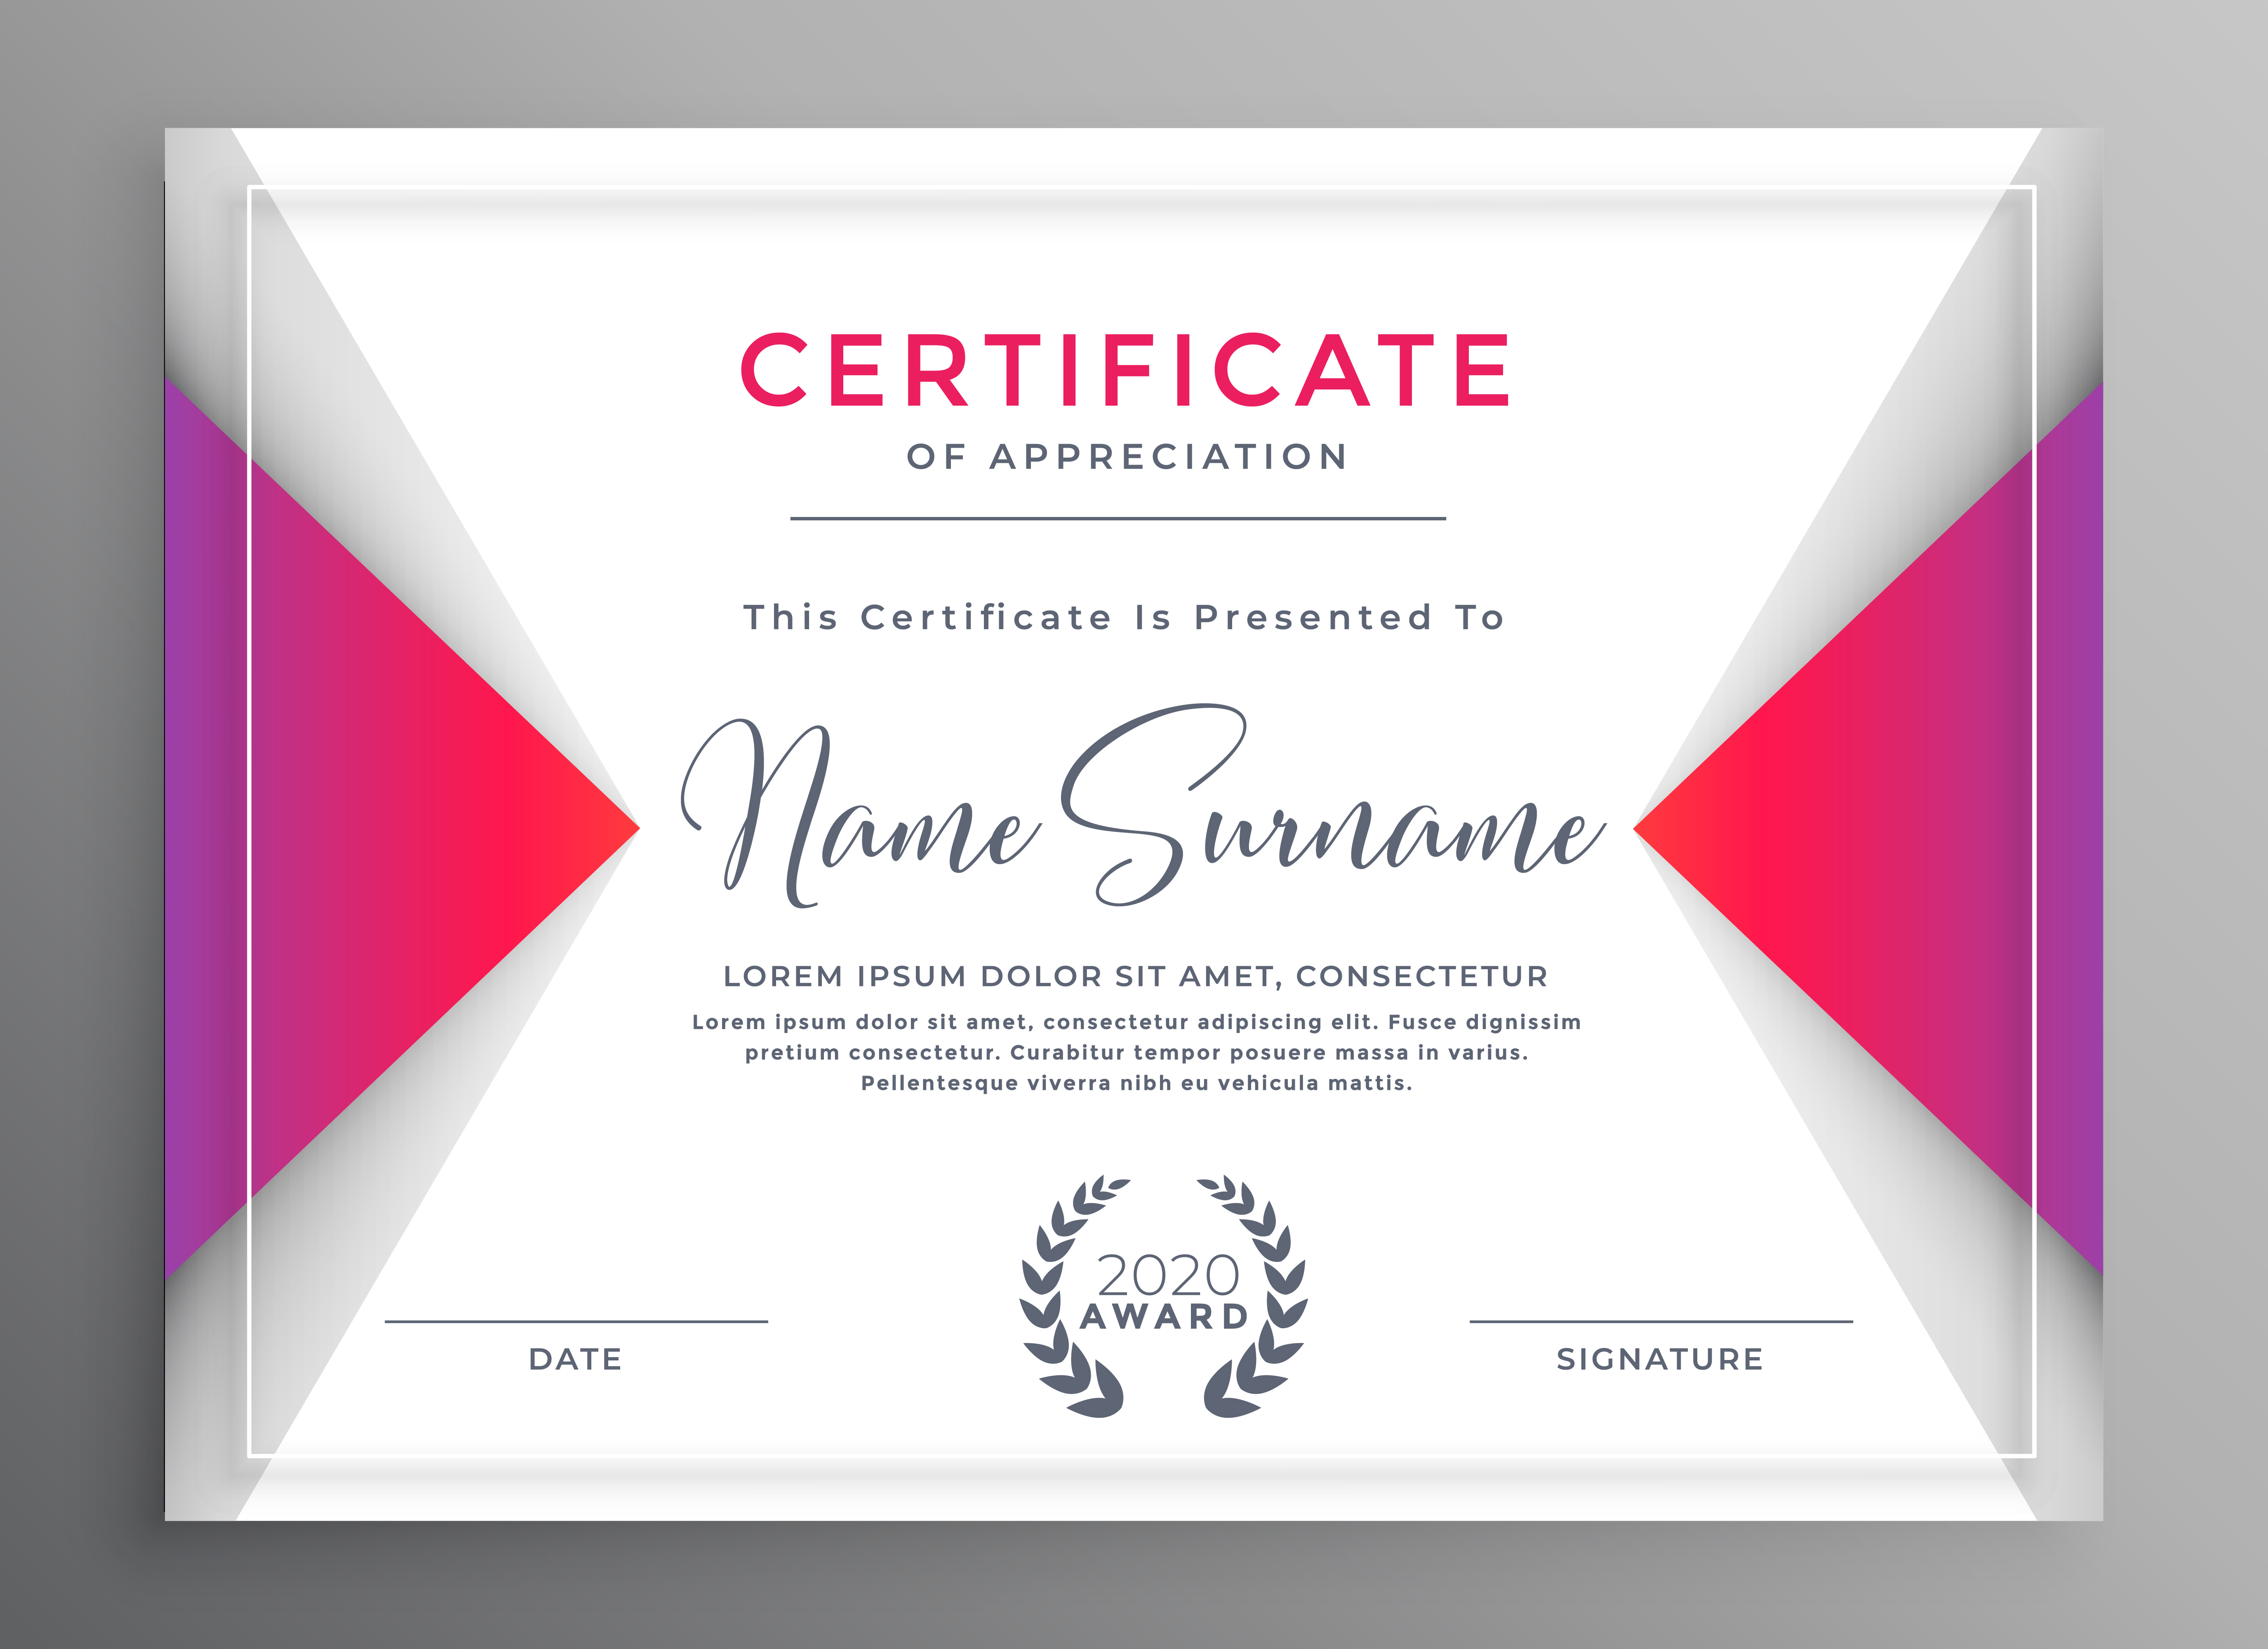 Certificate Of Achievement Template Free Download